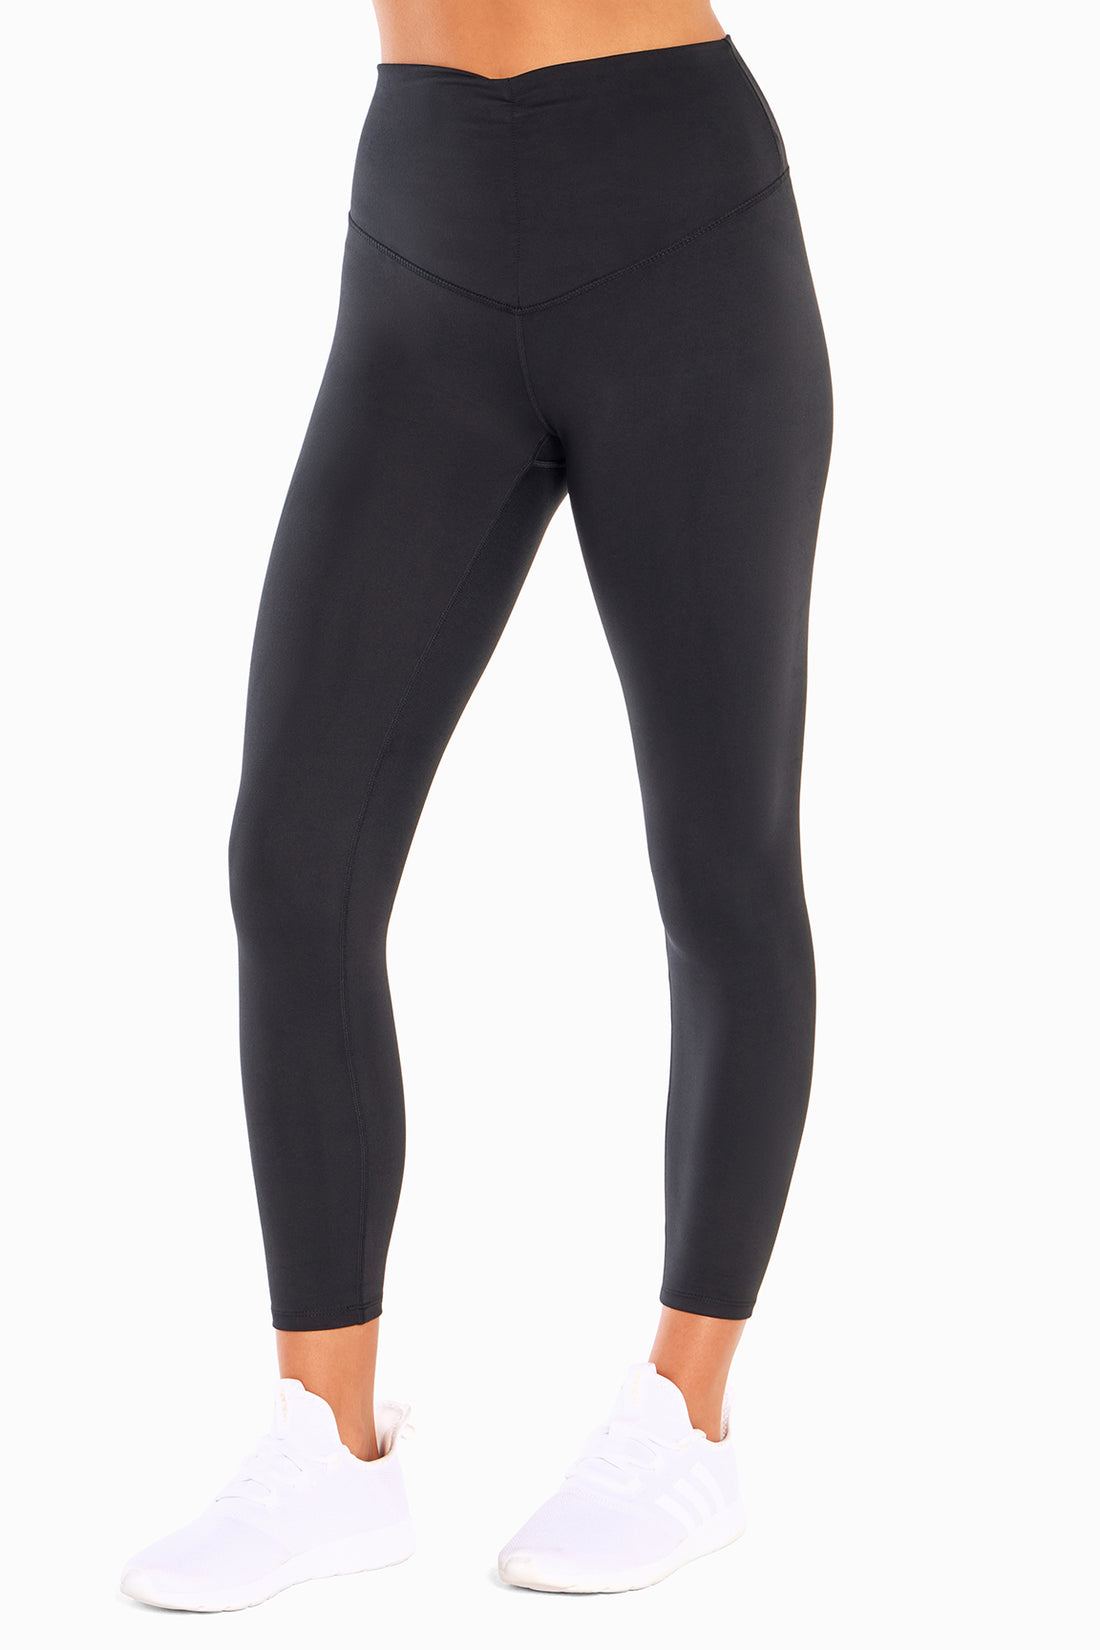 Marika Jordan Evade Active Leggings Large Black - $36 (40% Off Retail) New  With Tags - From Melissa